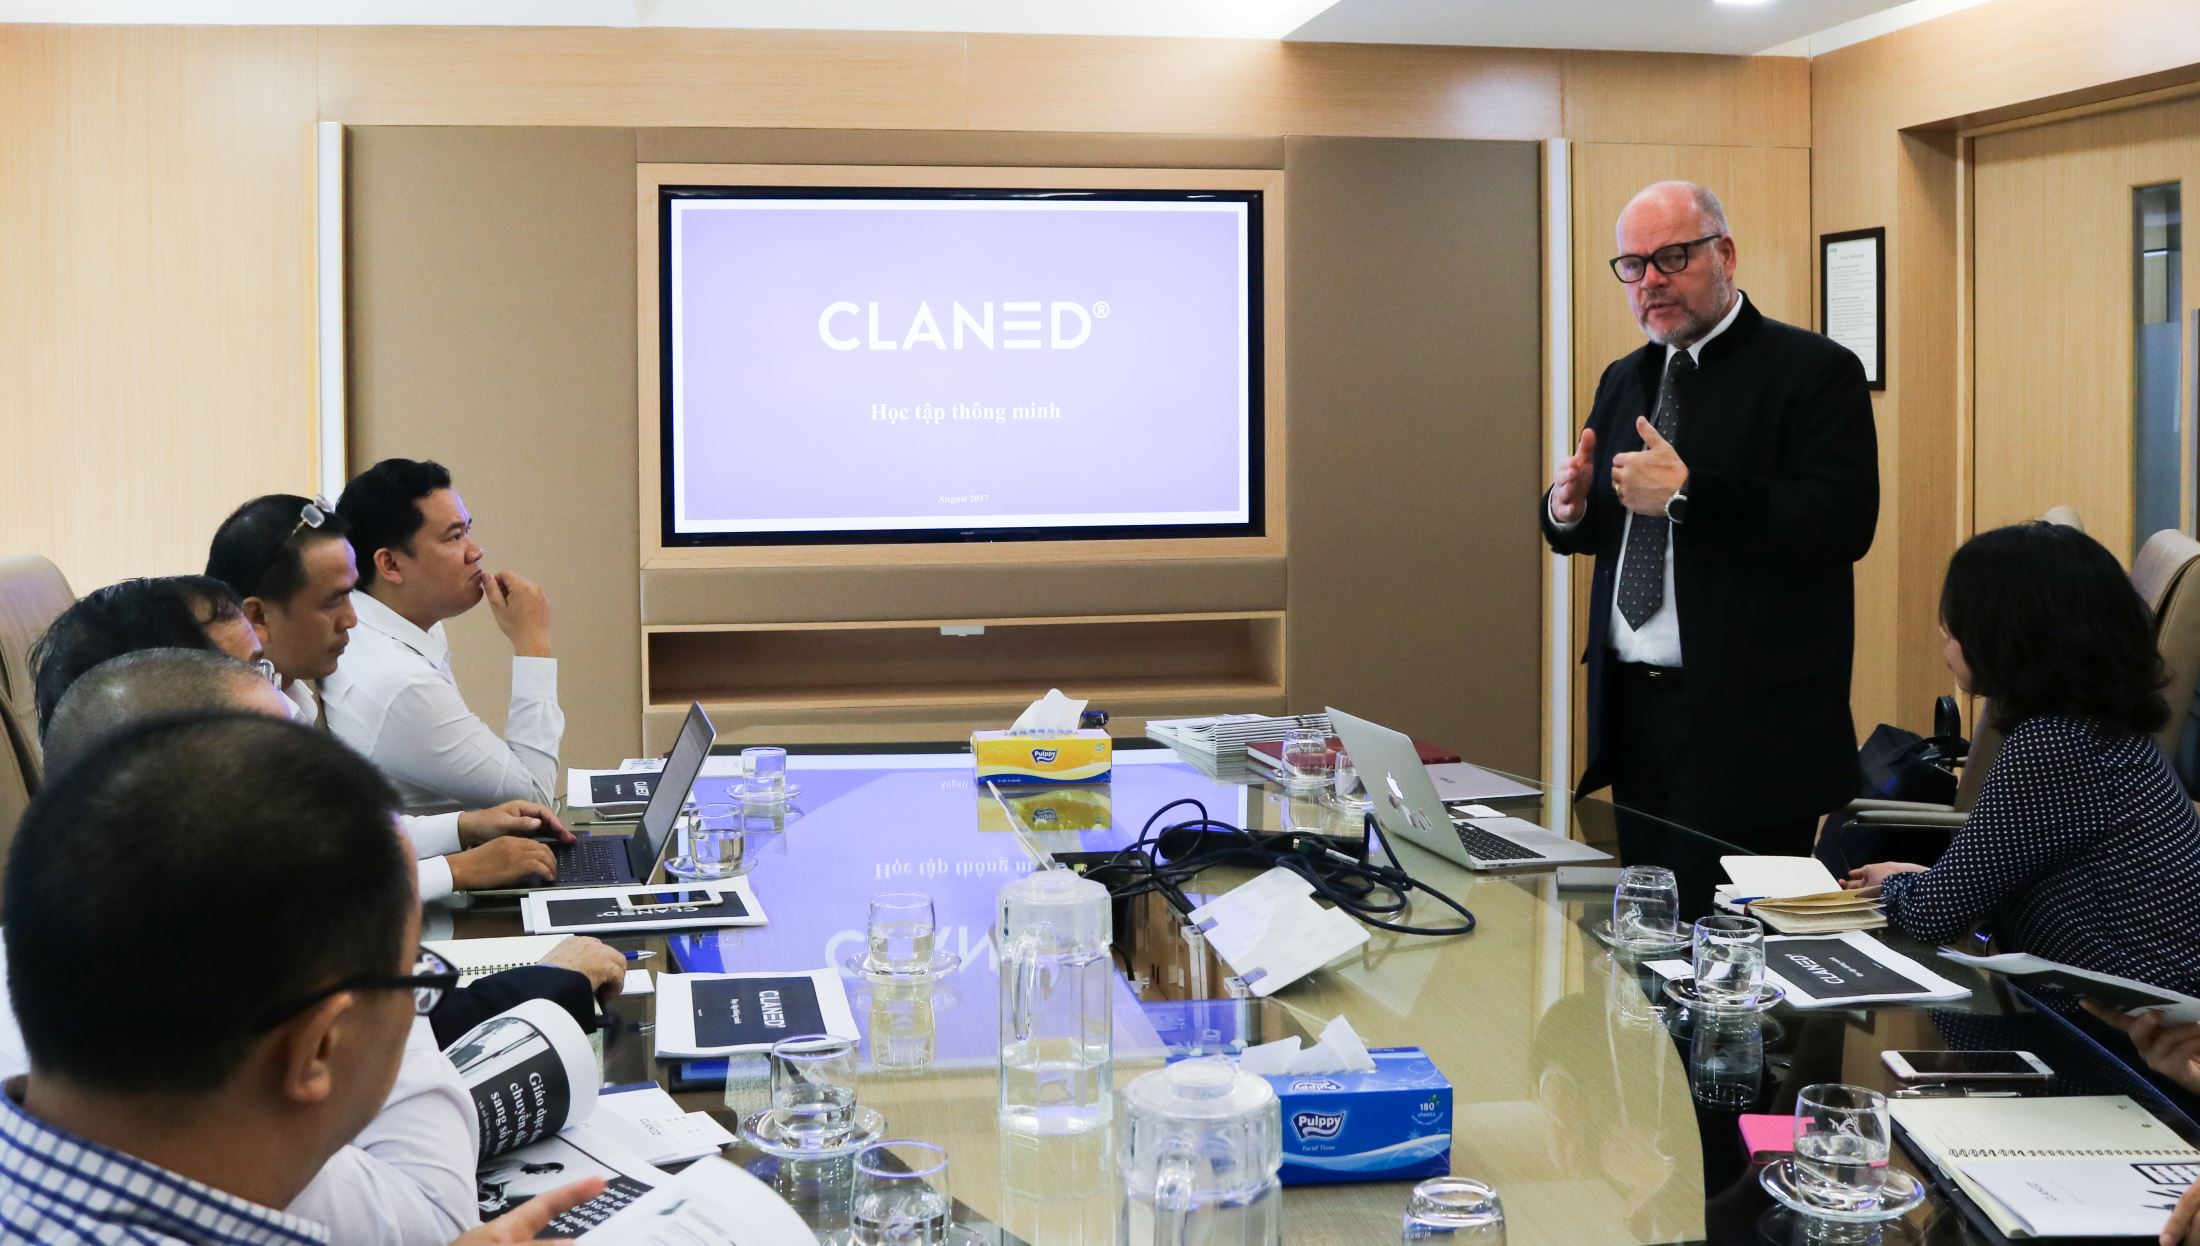 Mr. Pertti Jalasvirta, Senior Advisor of Claned gave a detailed introduction of Claned’s smart learning model at the meeting